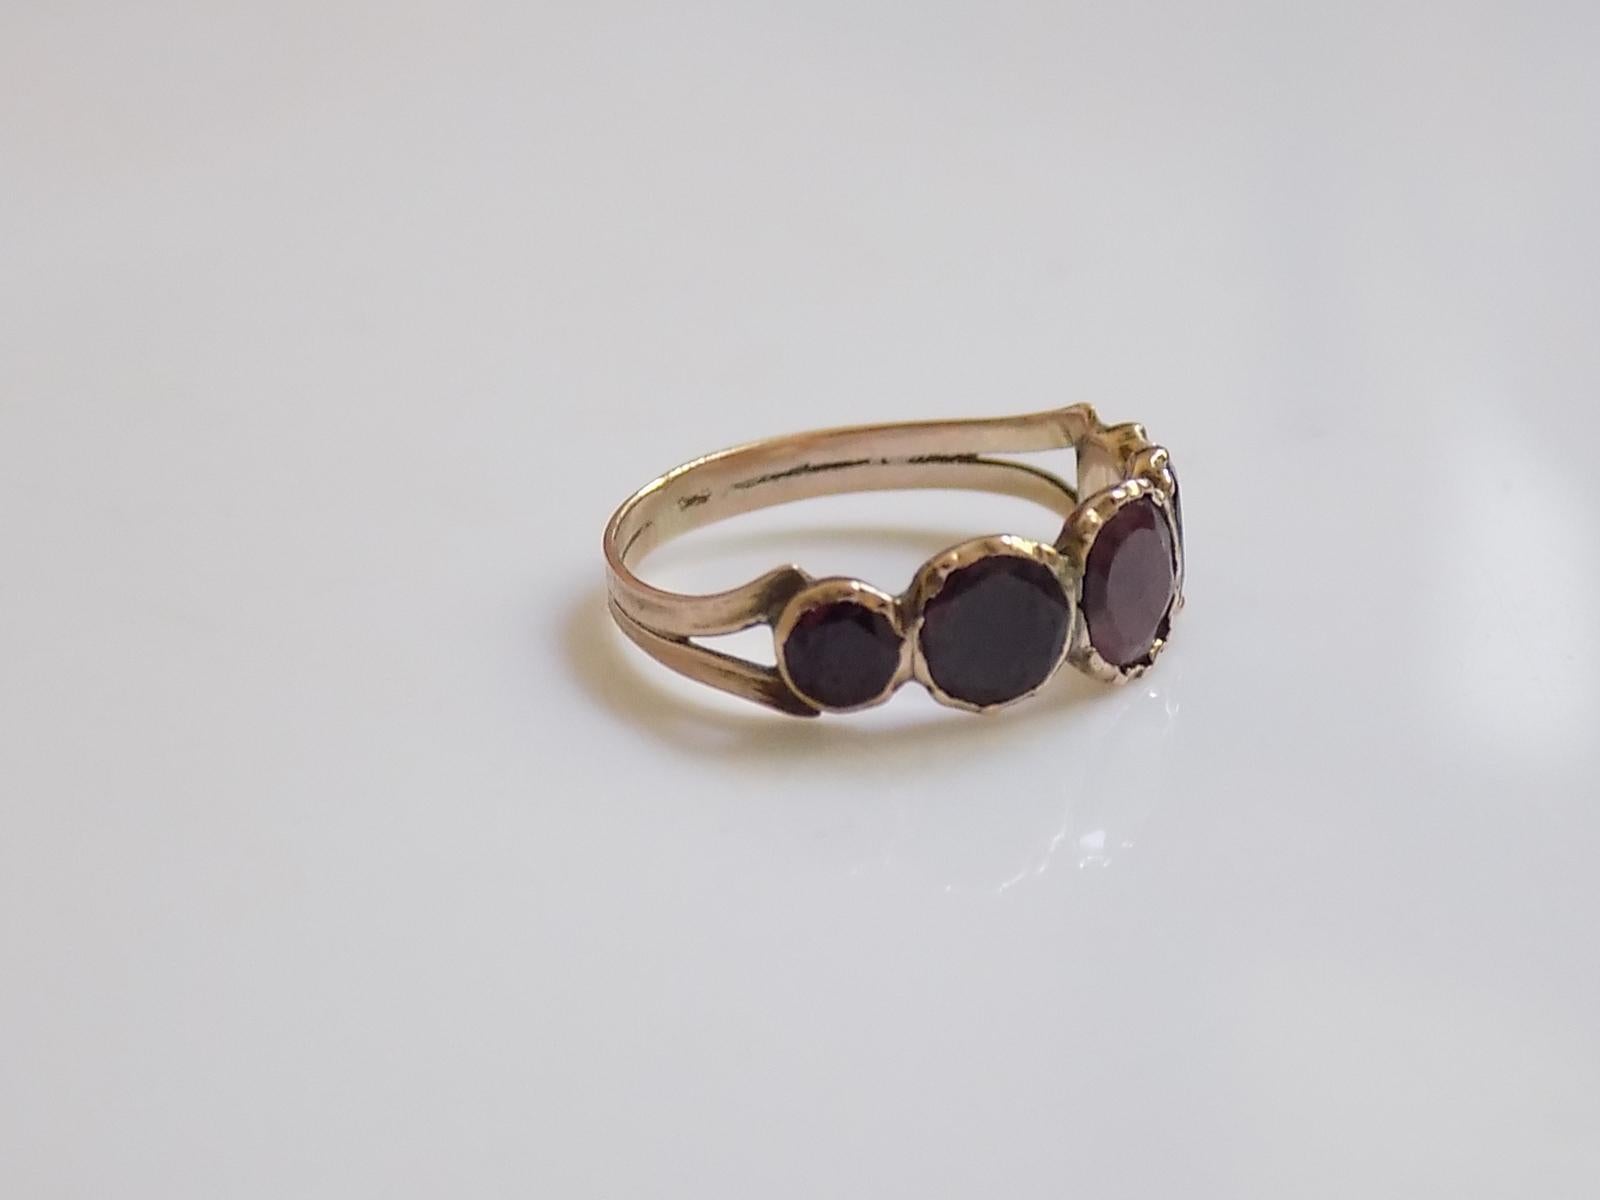 A Lovely Georgian c.1800 Rose Gold and five flat cut Garnet ring. The stones in closed back setting. English origin.
Size I UK, 4.5 US.
Height of the face 6mm.
Weight 1.2gr.
Unmarked.
The ring in very good condition for the age and ready to wear.